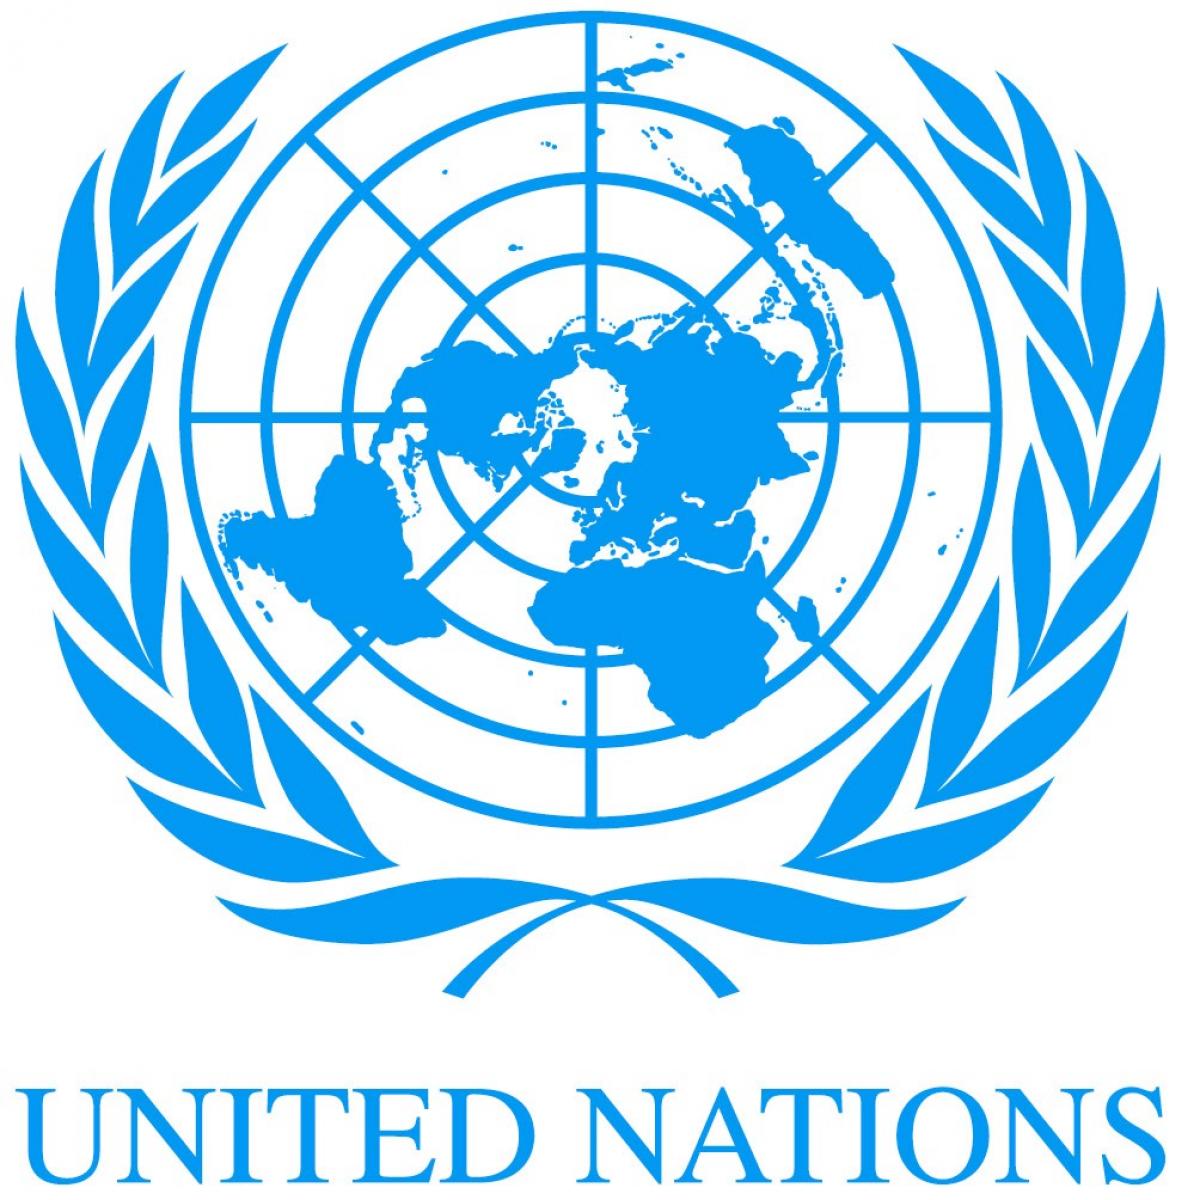 United Nations to Host Youth Leadership Camp in Doha